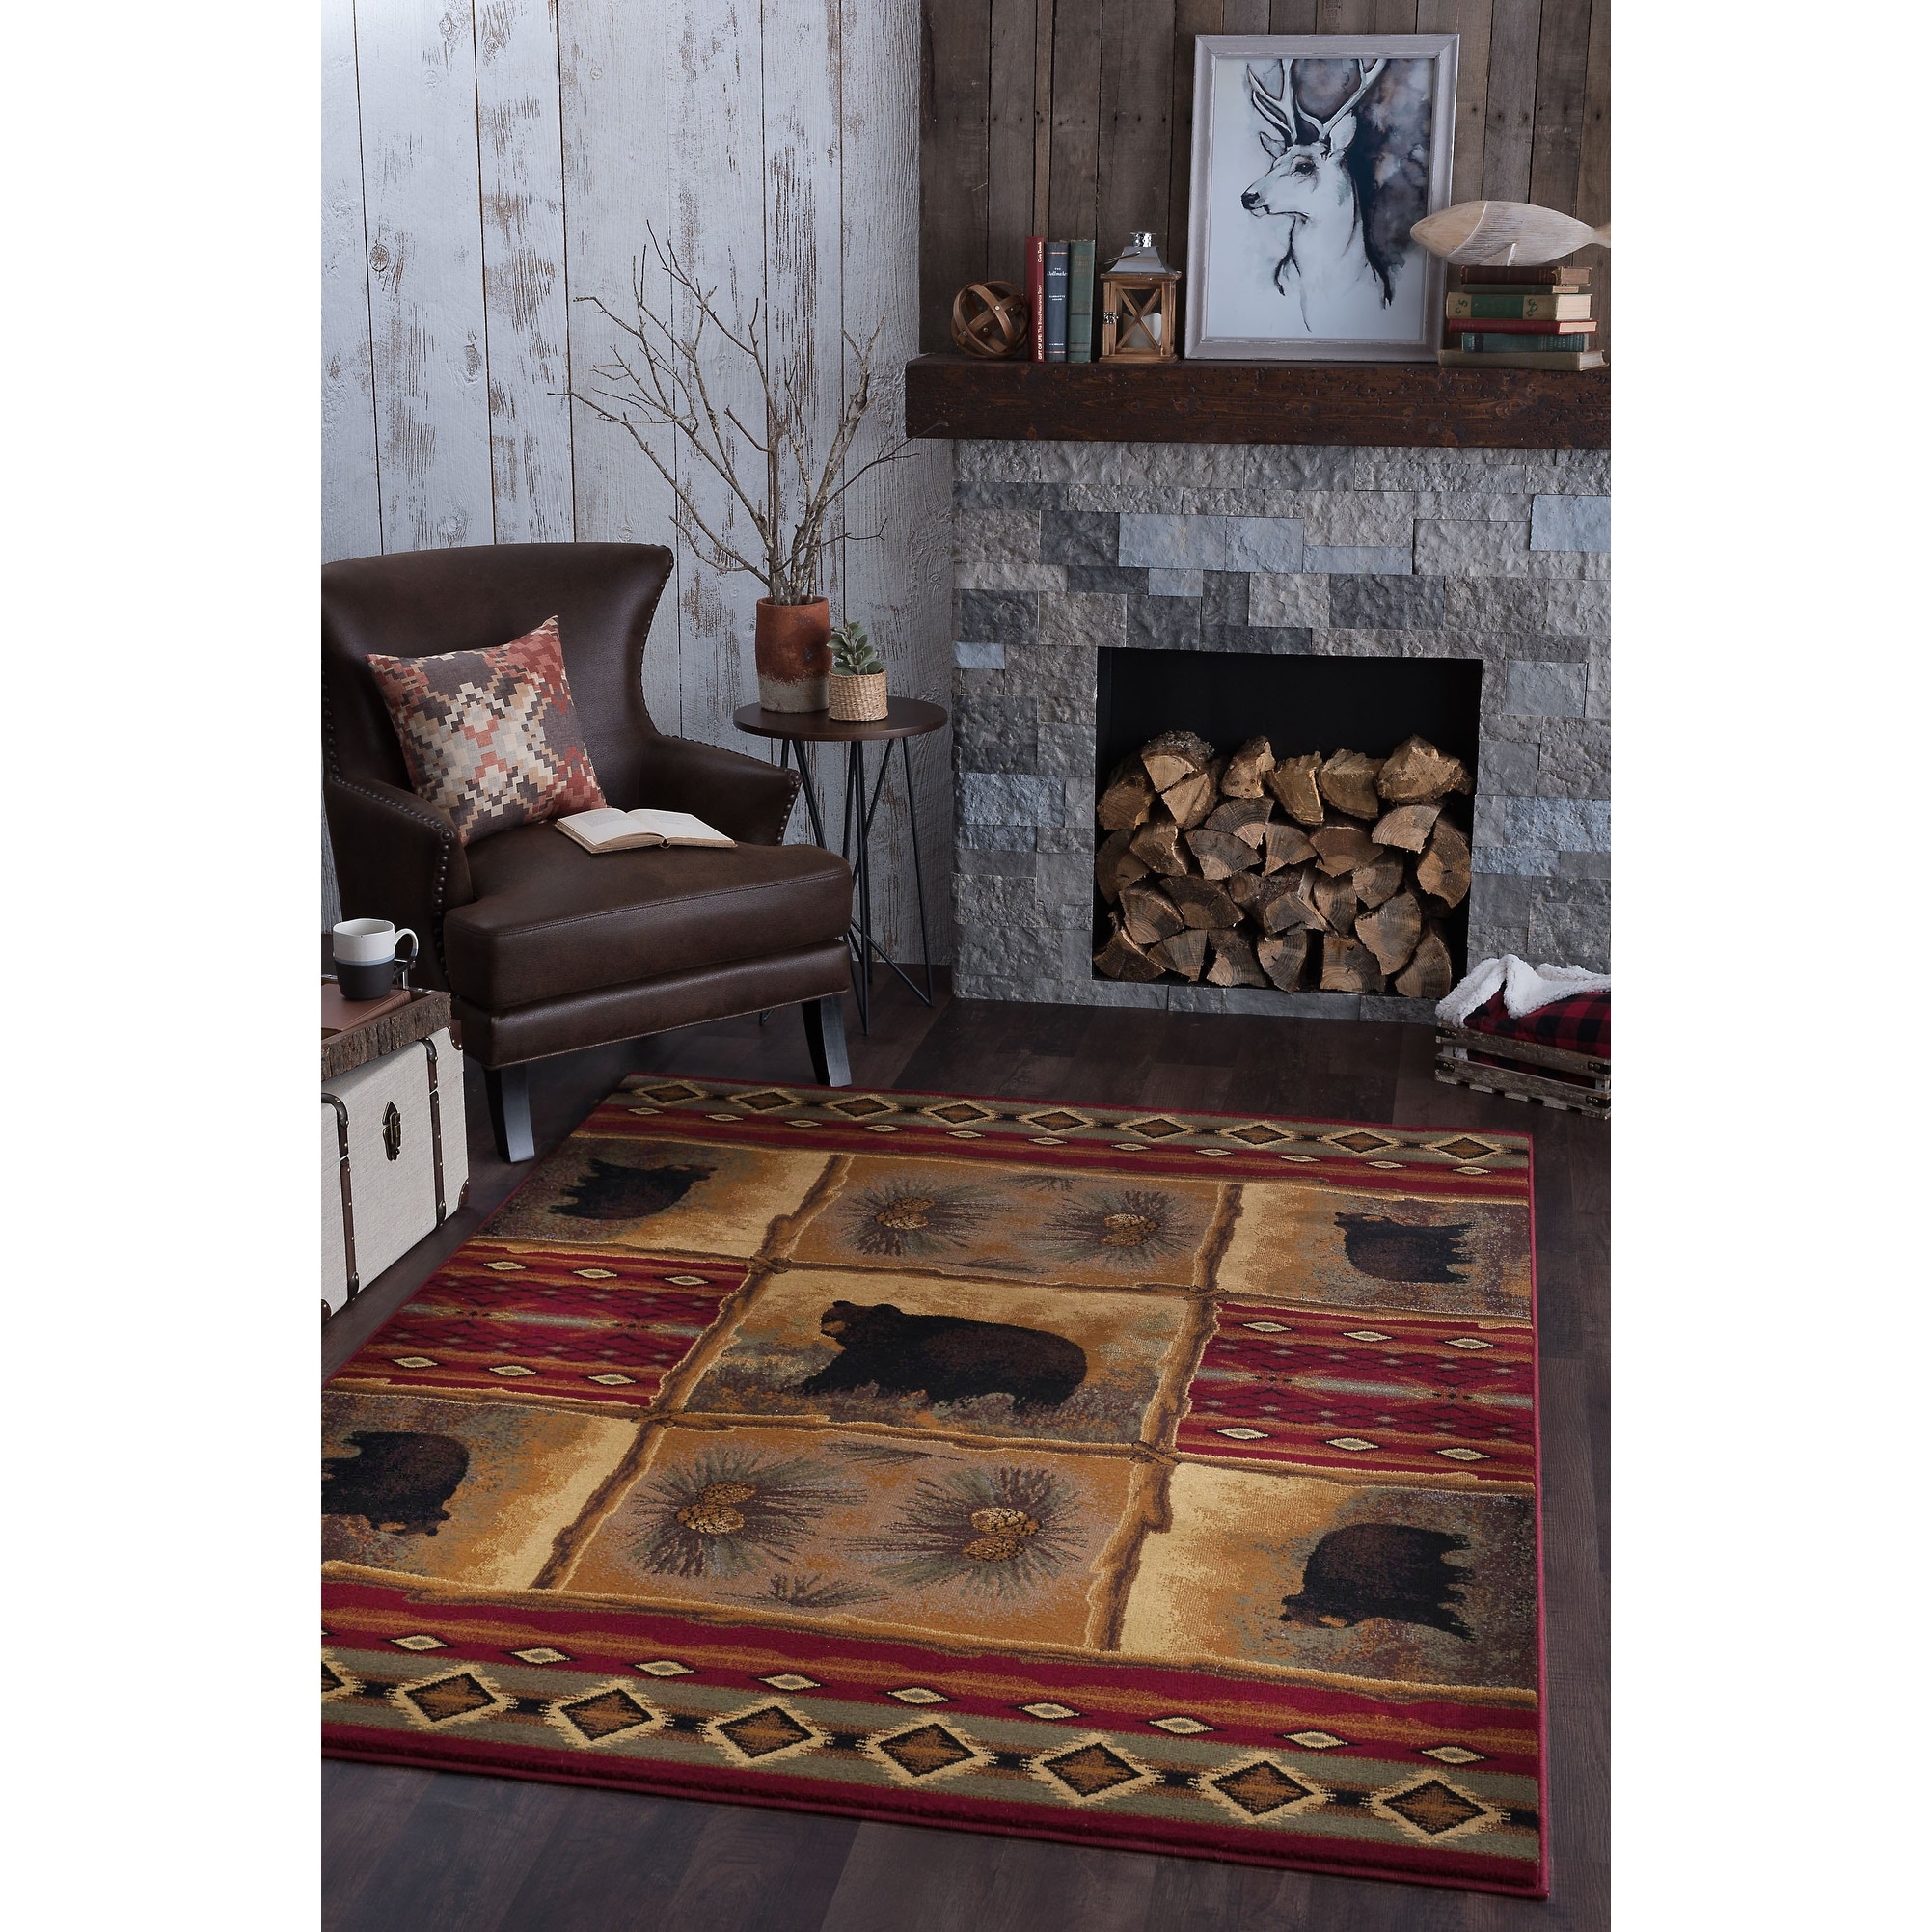 Rustic, Graphic Rugs - Bed Bath & Beyond